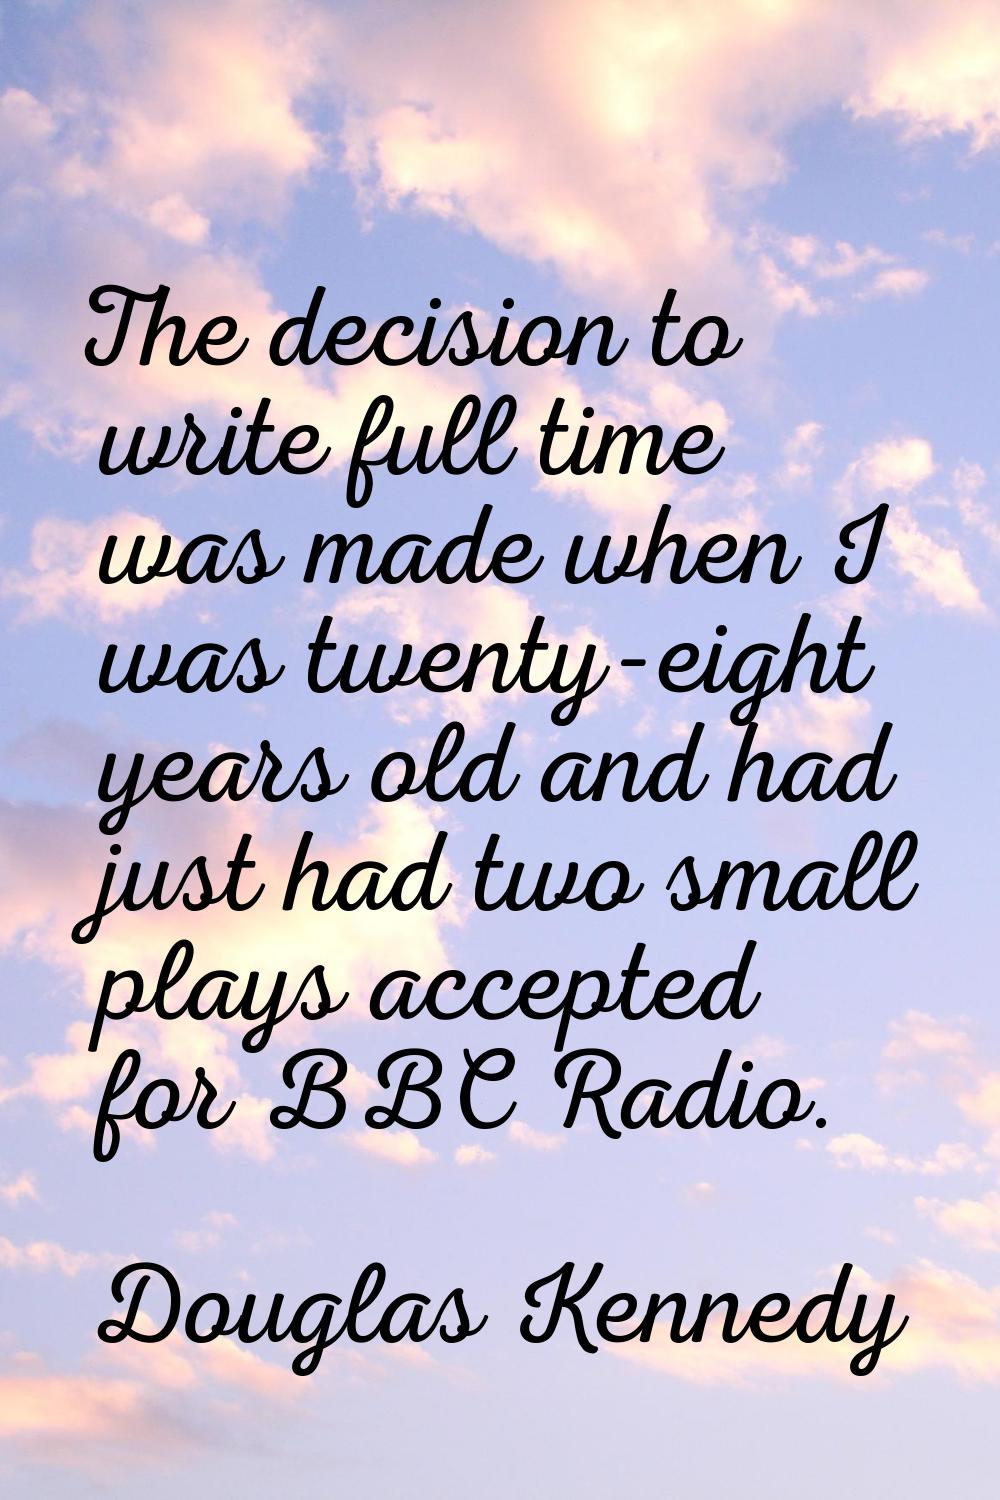 The decision to write full time was made when I was twenty-eight years old and had just had two sma